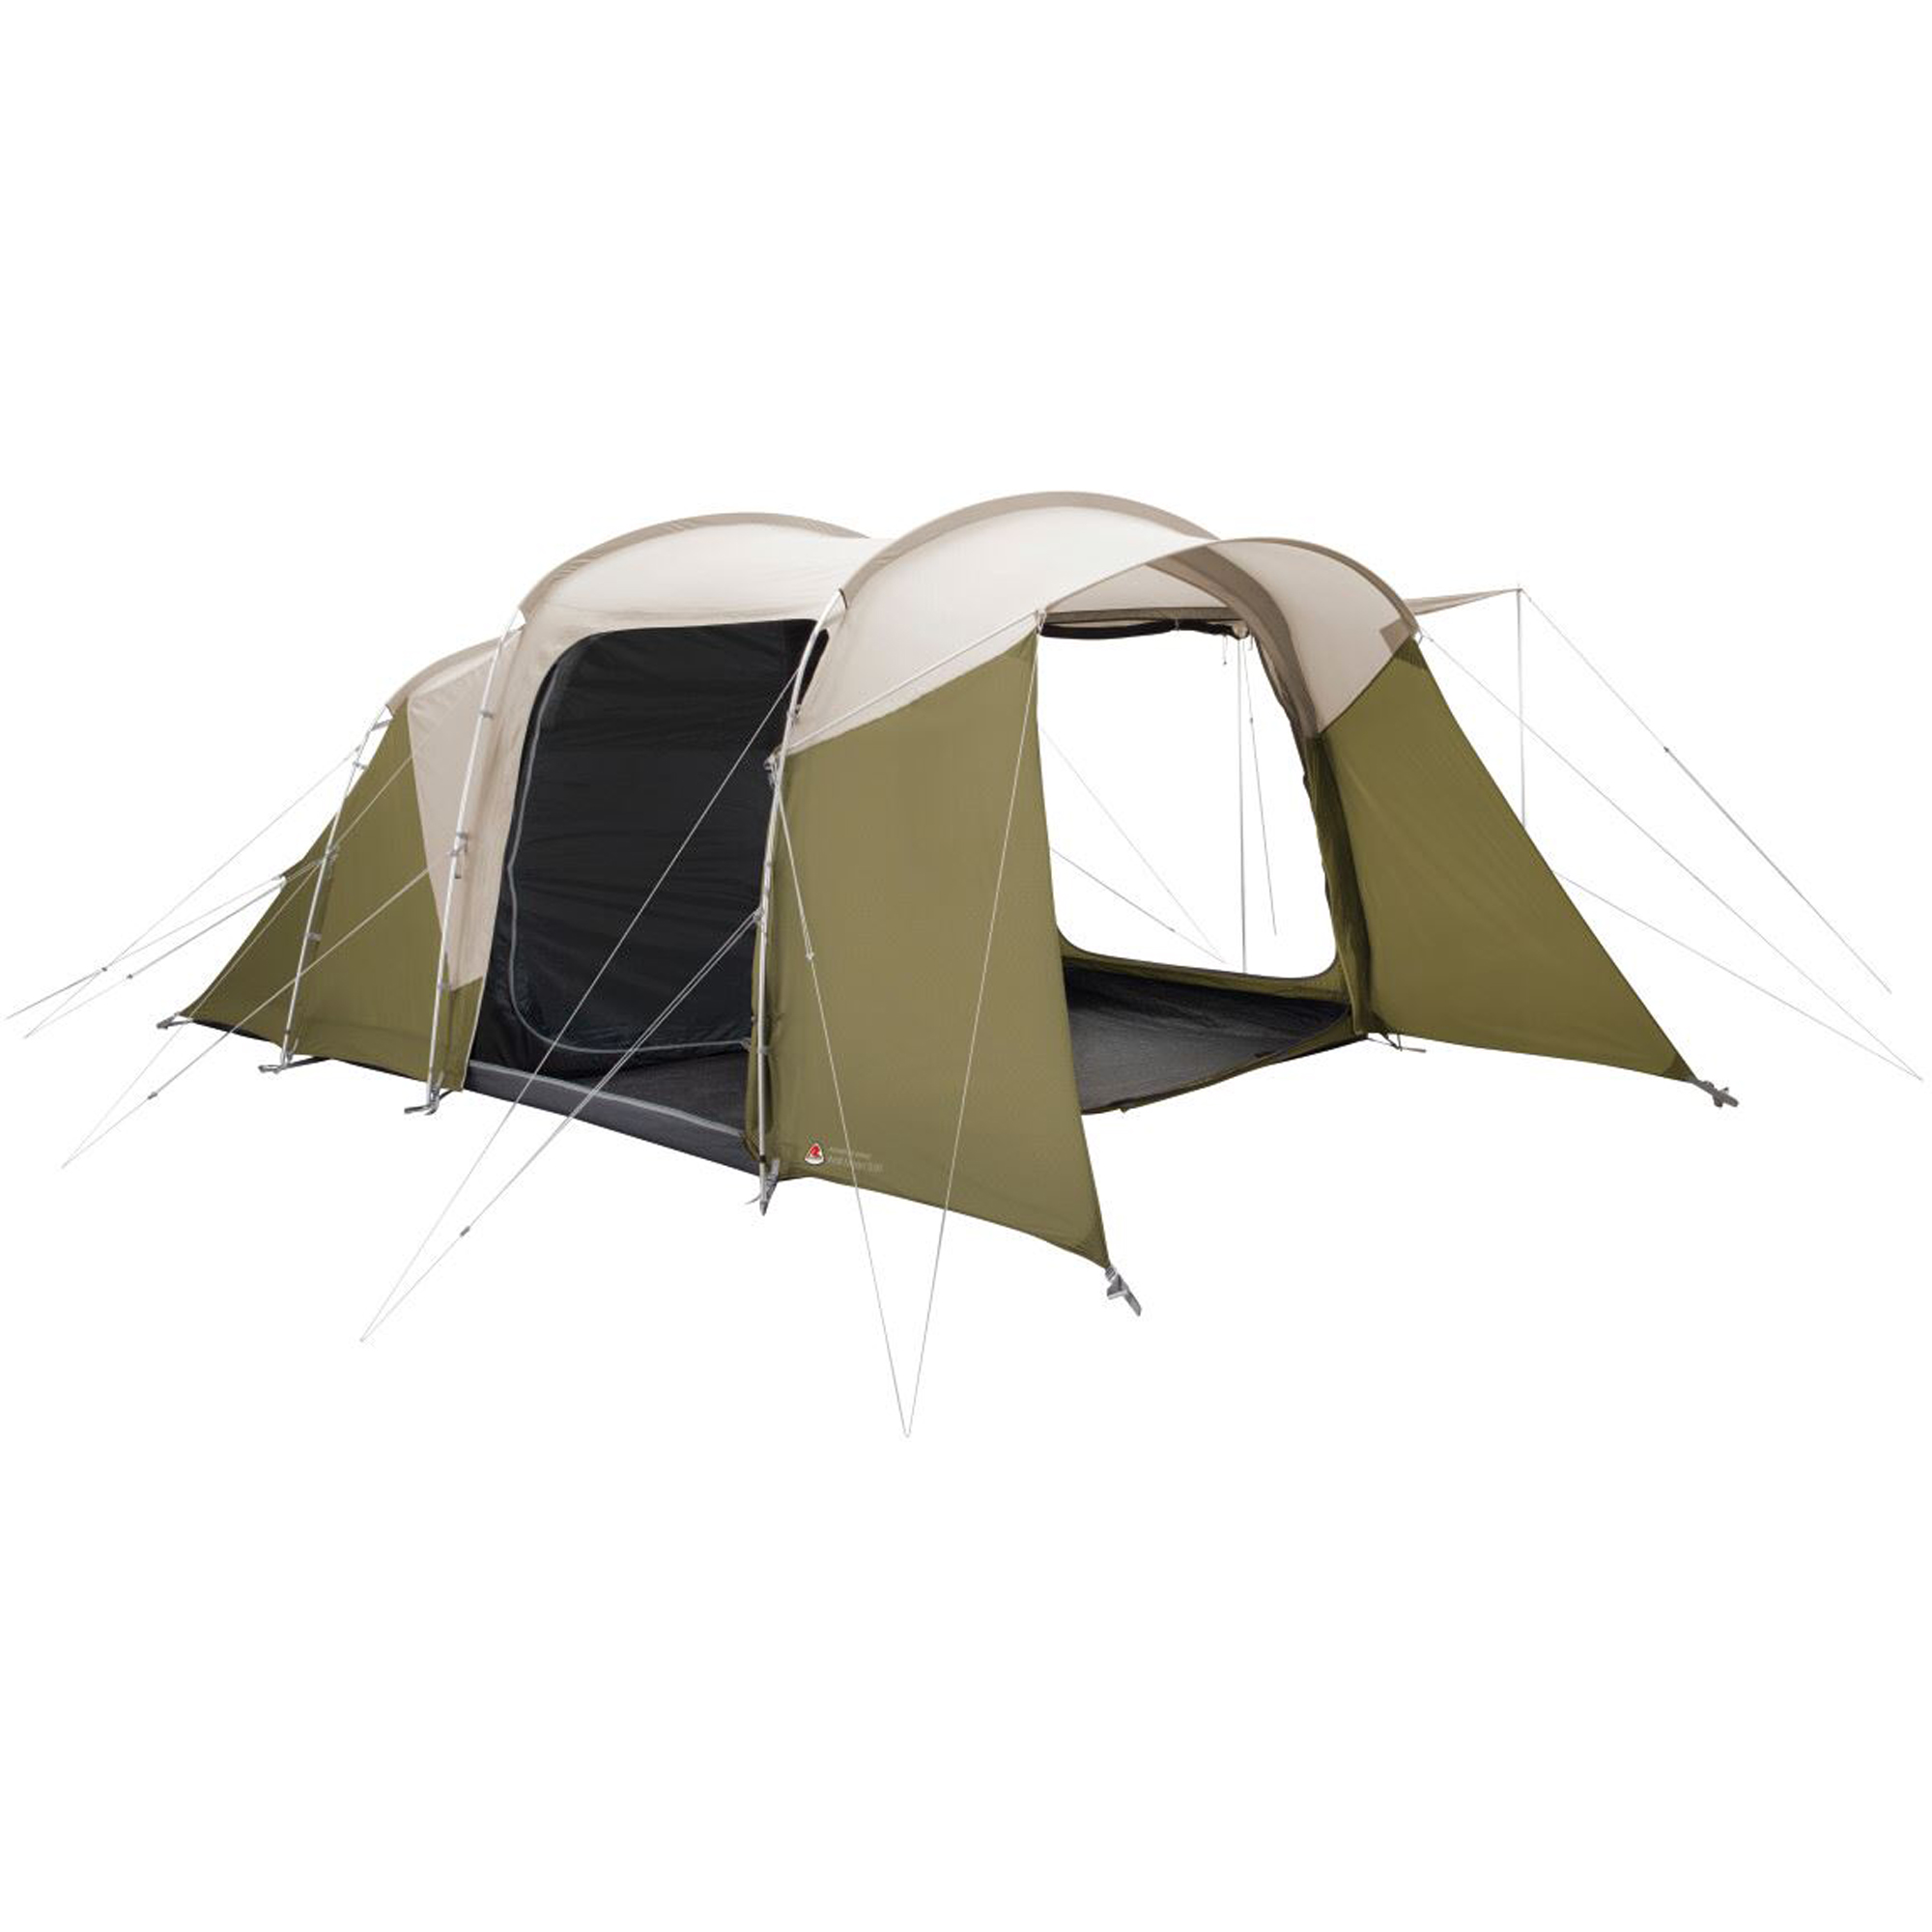 Robens Wolf Moon 5 XP Family Camping Tent